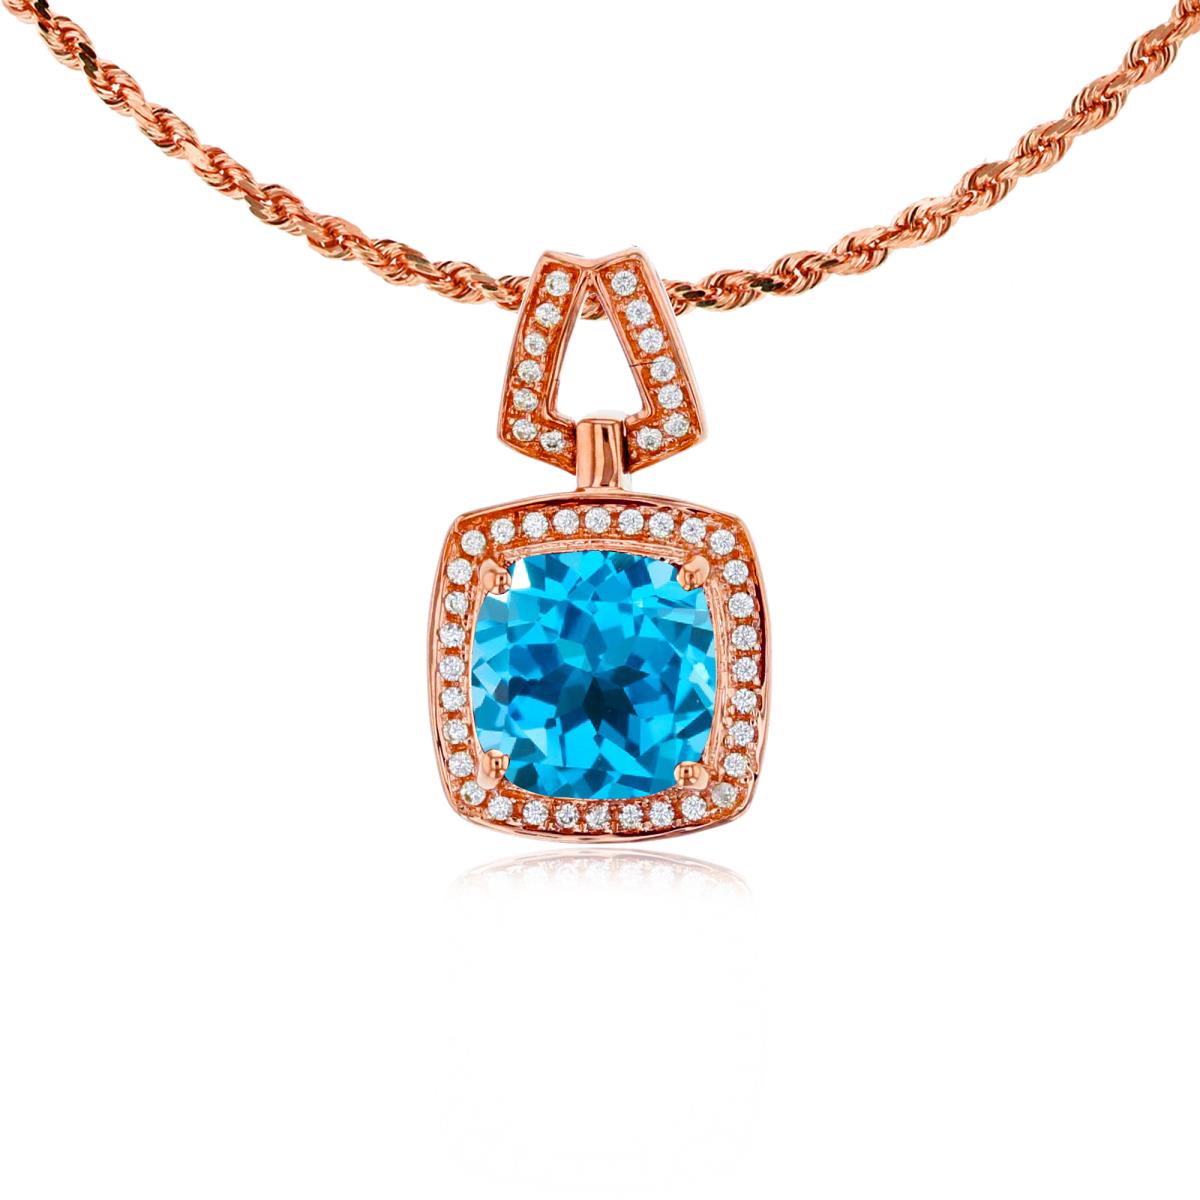 14K Rose Gold 7mm Cushion Swiss Blue Topaz & 0.10 CTTW Diamond Halo 18" Rope Chain Necklace